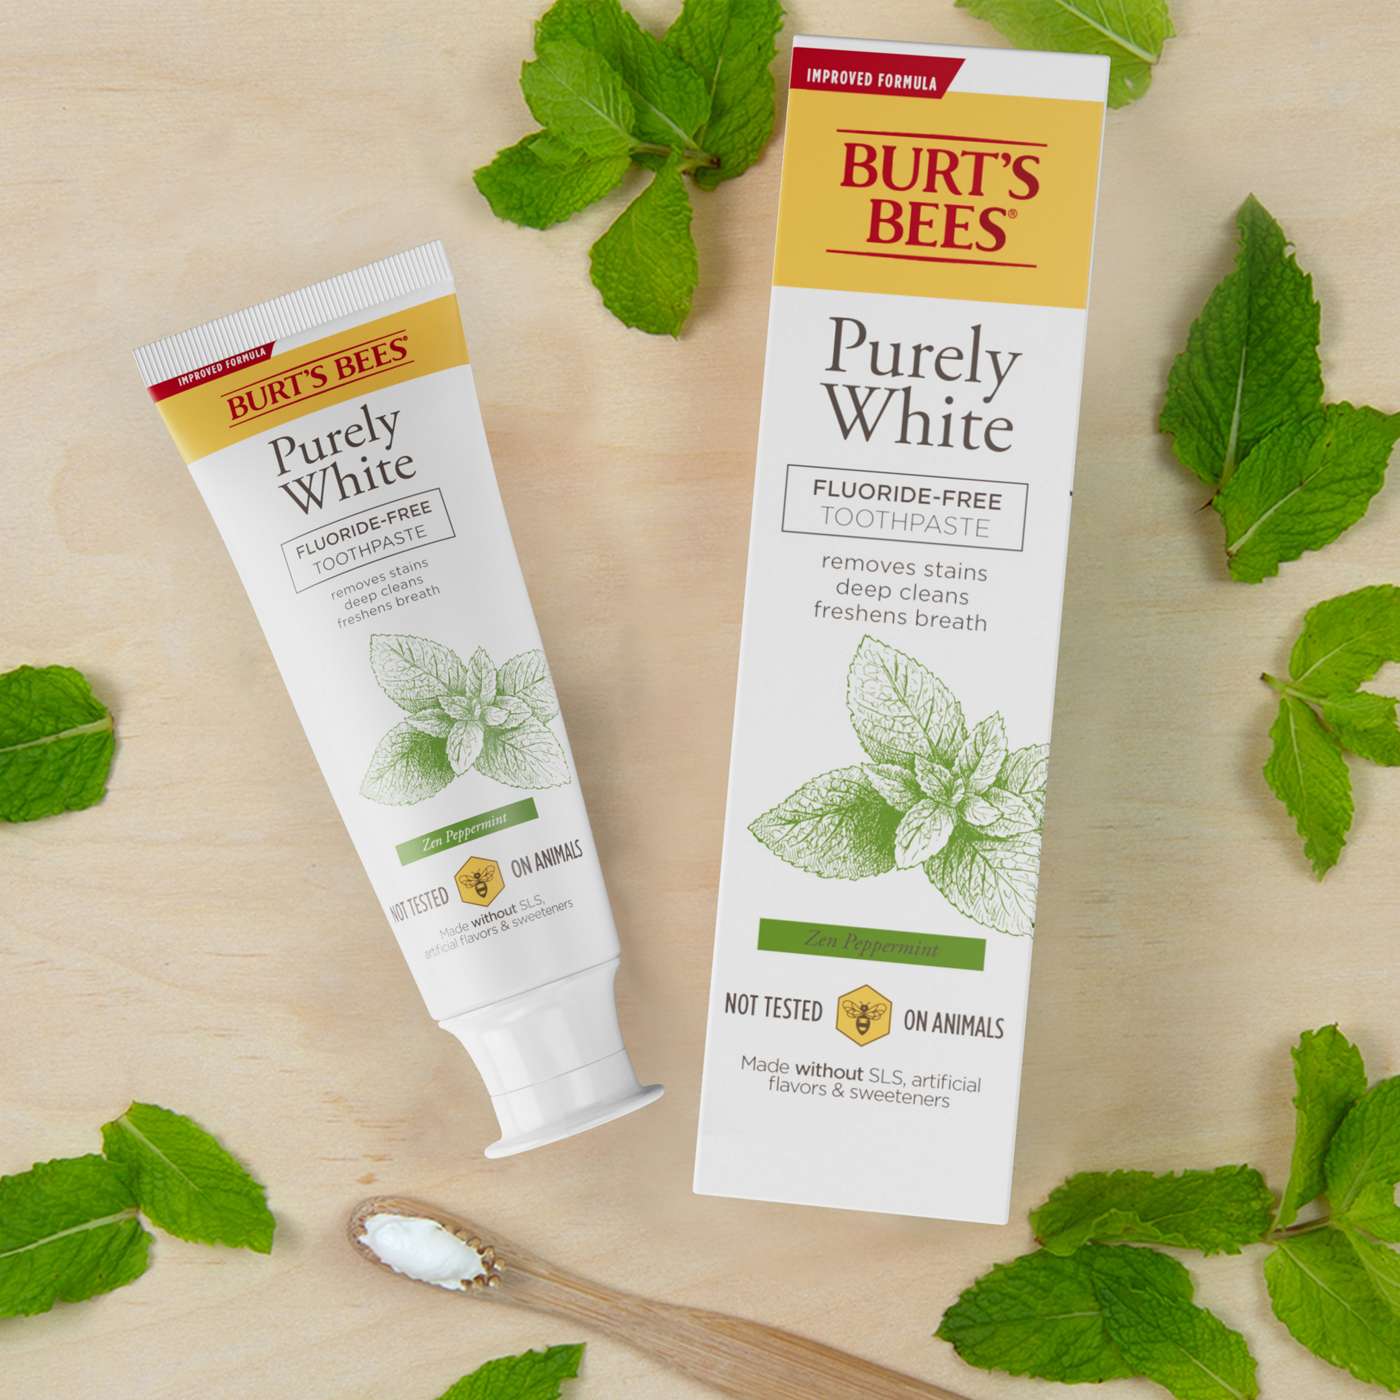 Burt's Bees Purely White Fluoride-Free Toothpaste - Zen Peppermint; image 7 of 8